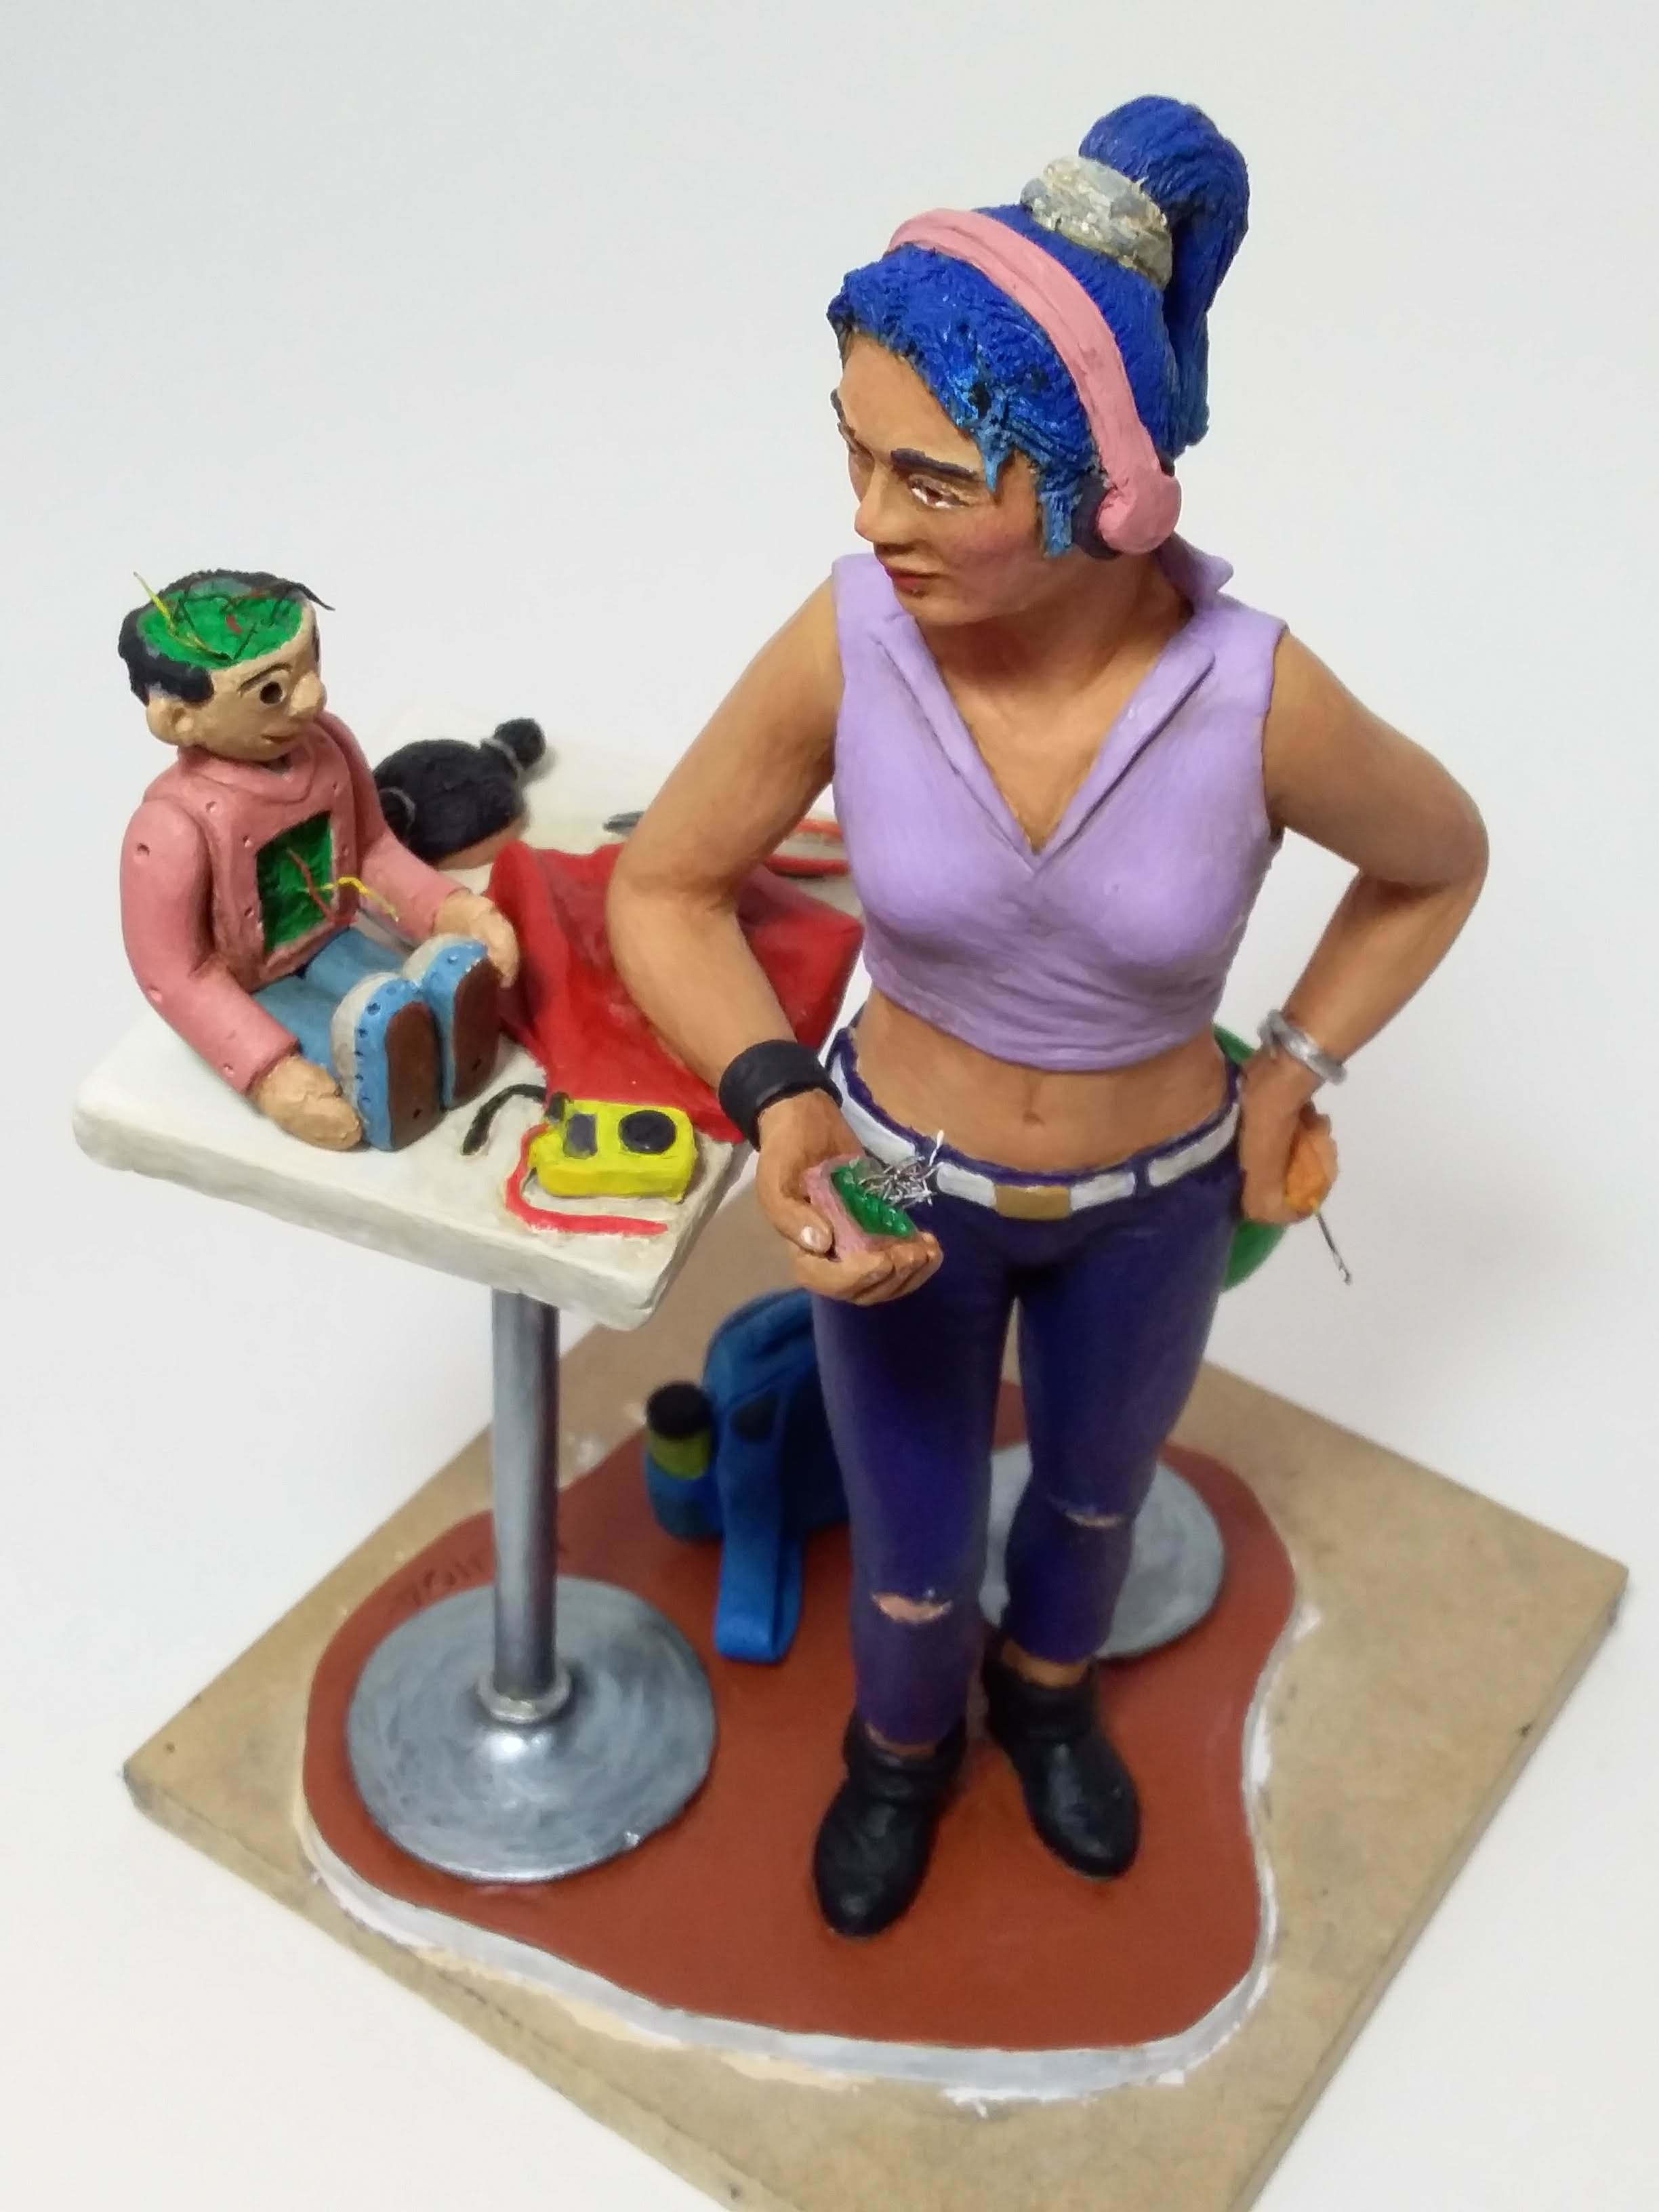 Make sculpture of characters in polymer clay by Jorgeochoaarte | Fiverr